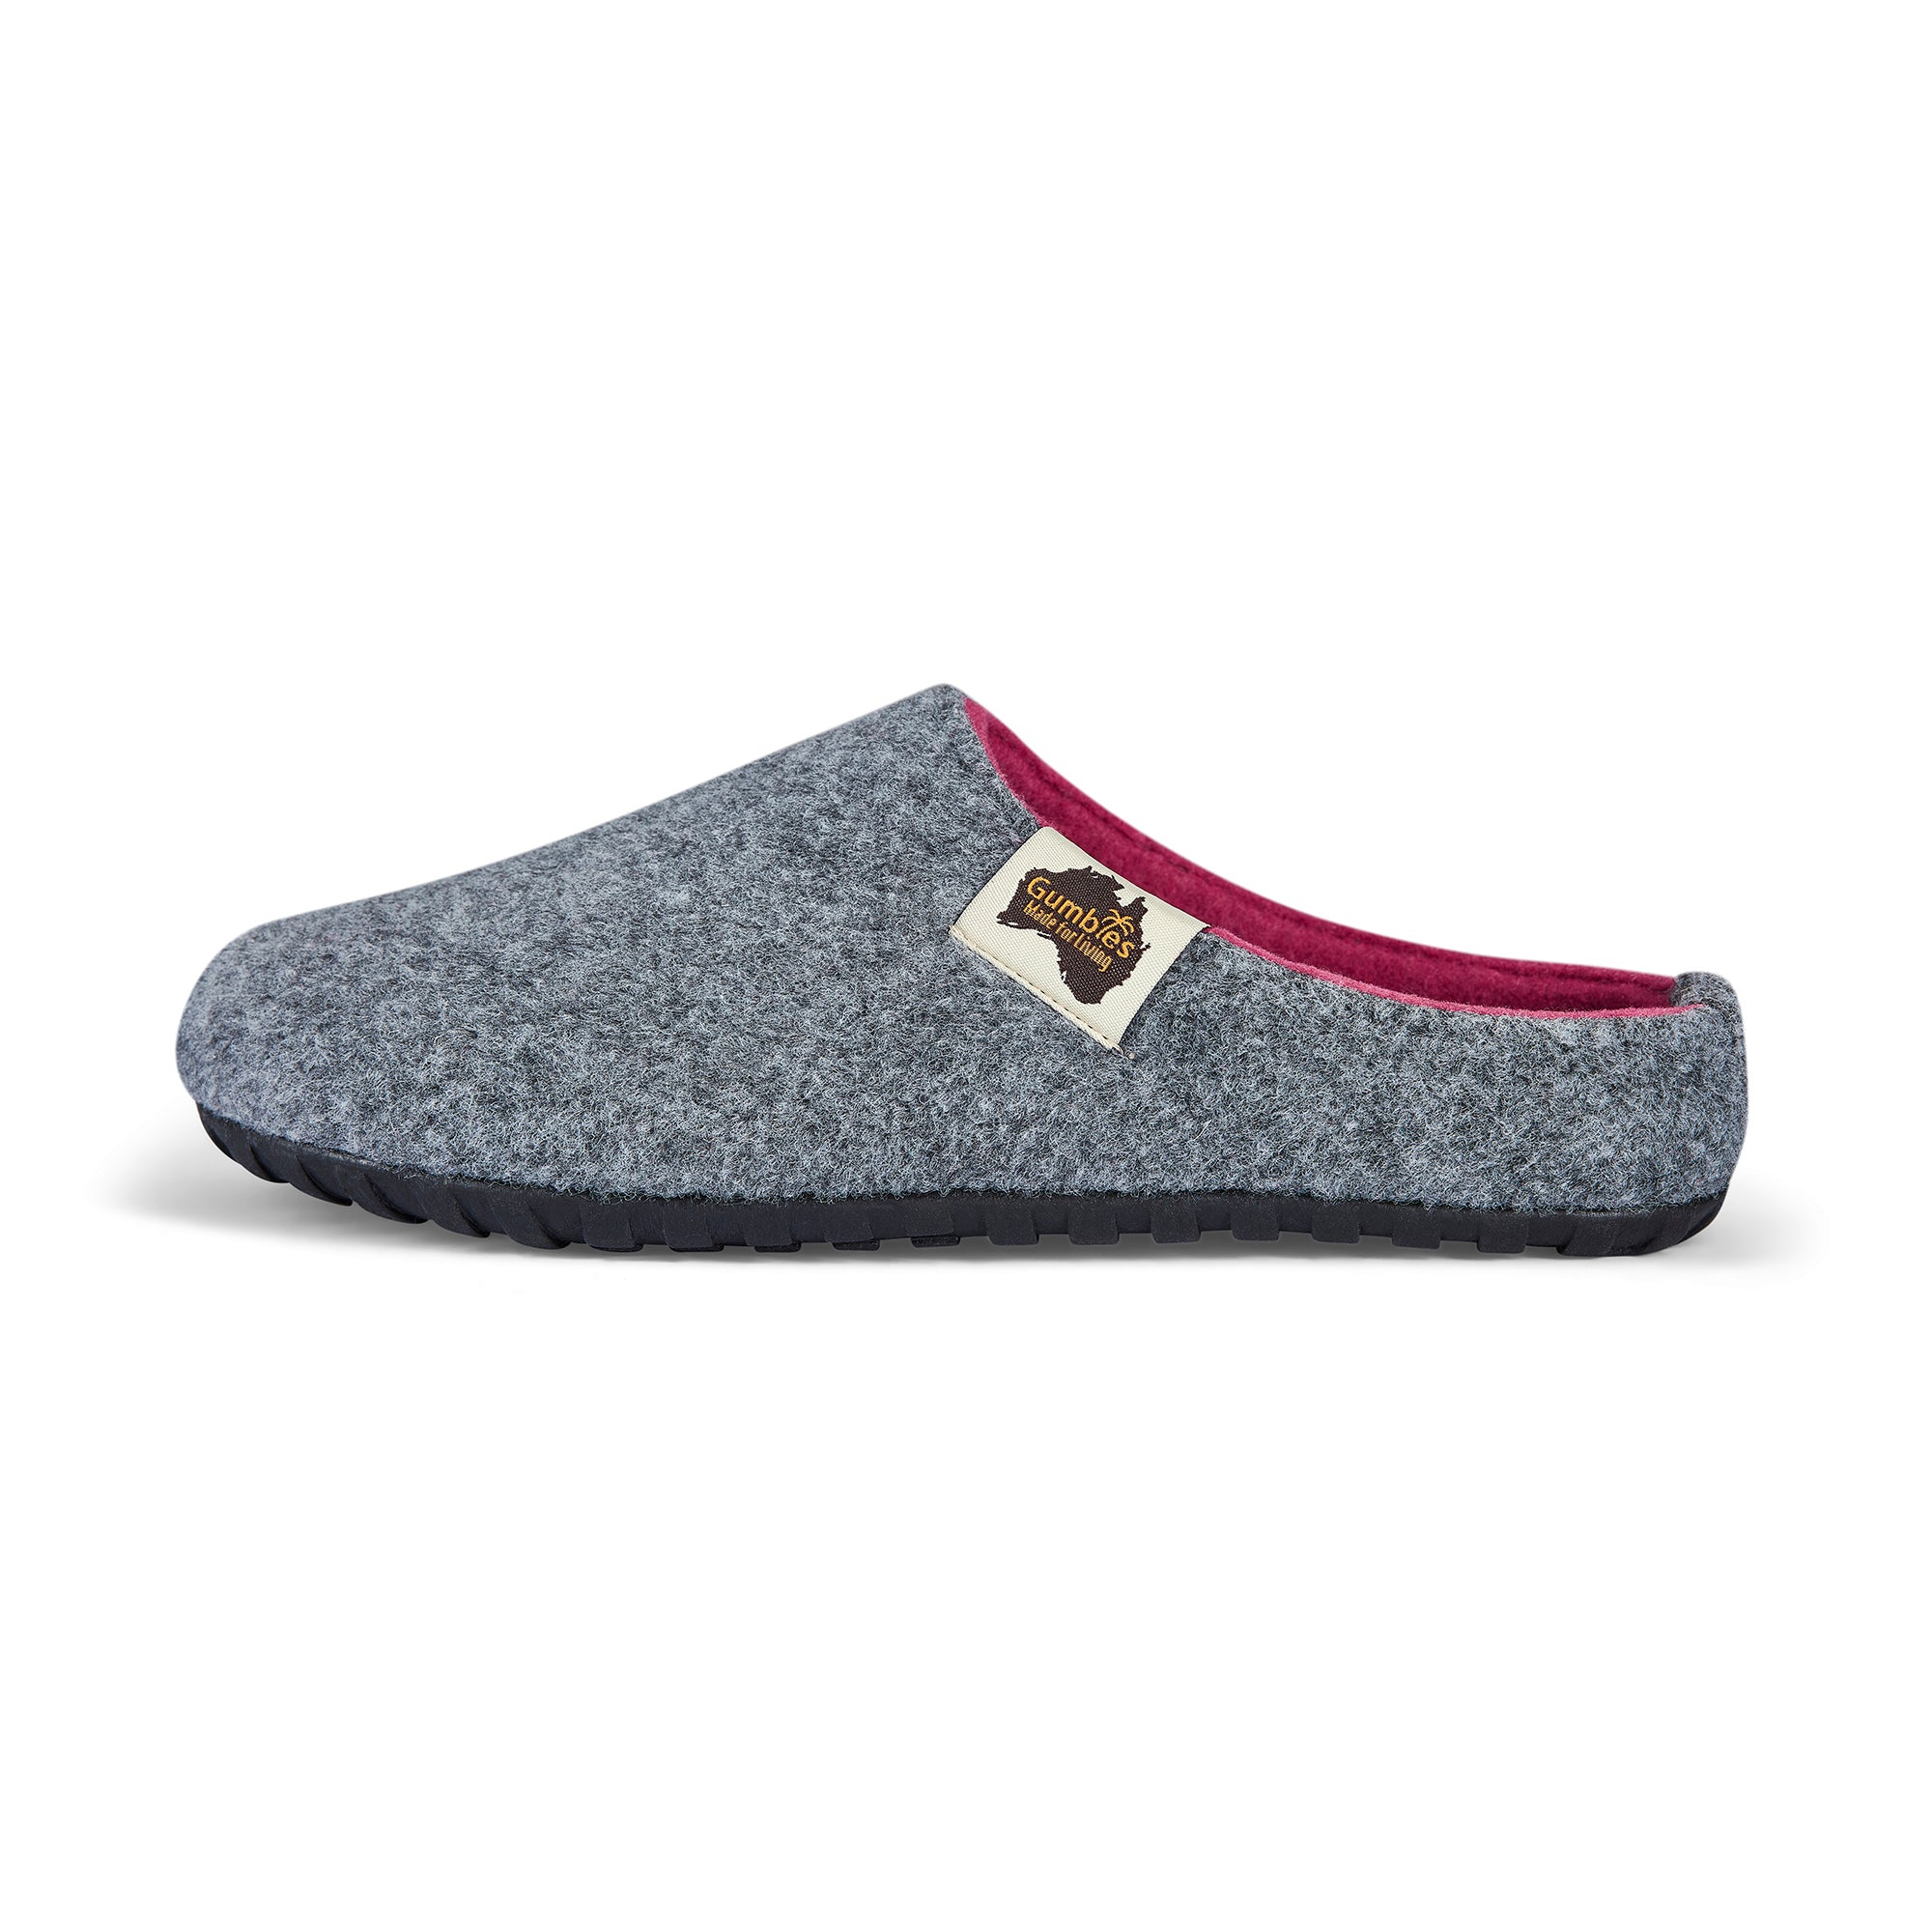 Outback - Women's - Grey & Pink